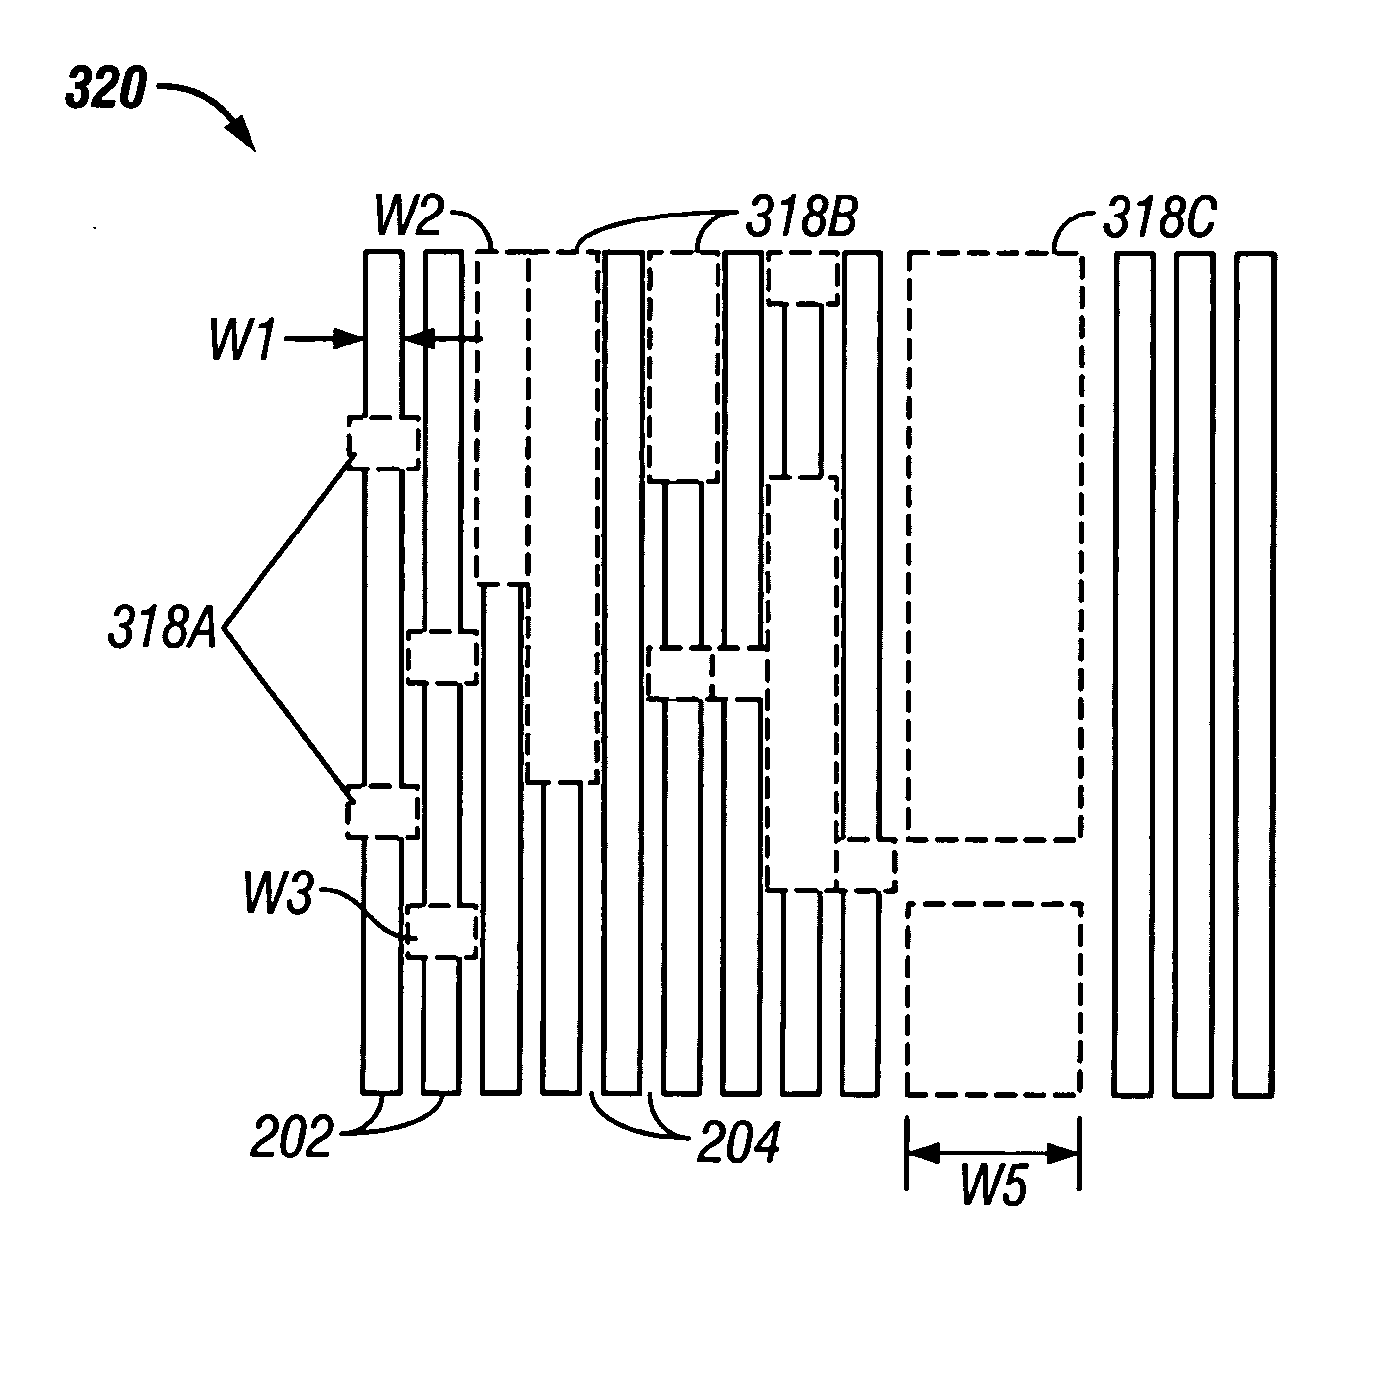 Composite optical lithography method for patterning lines of significantly different widths